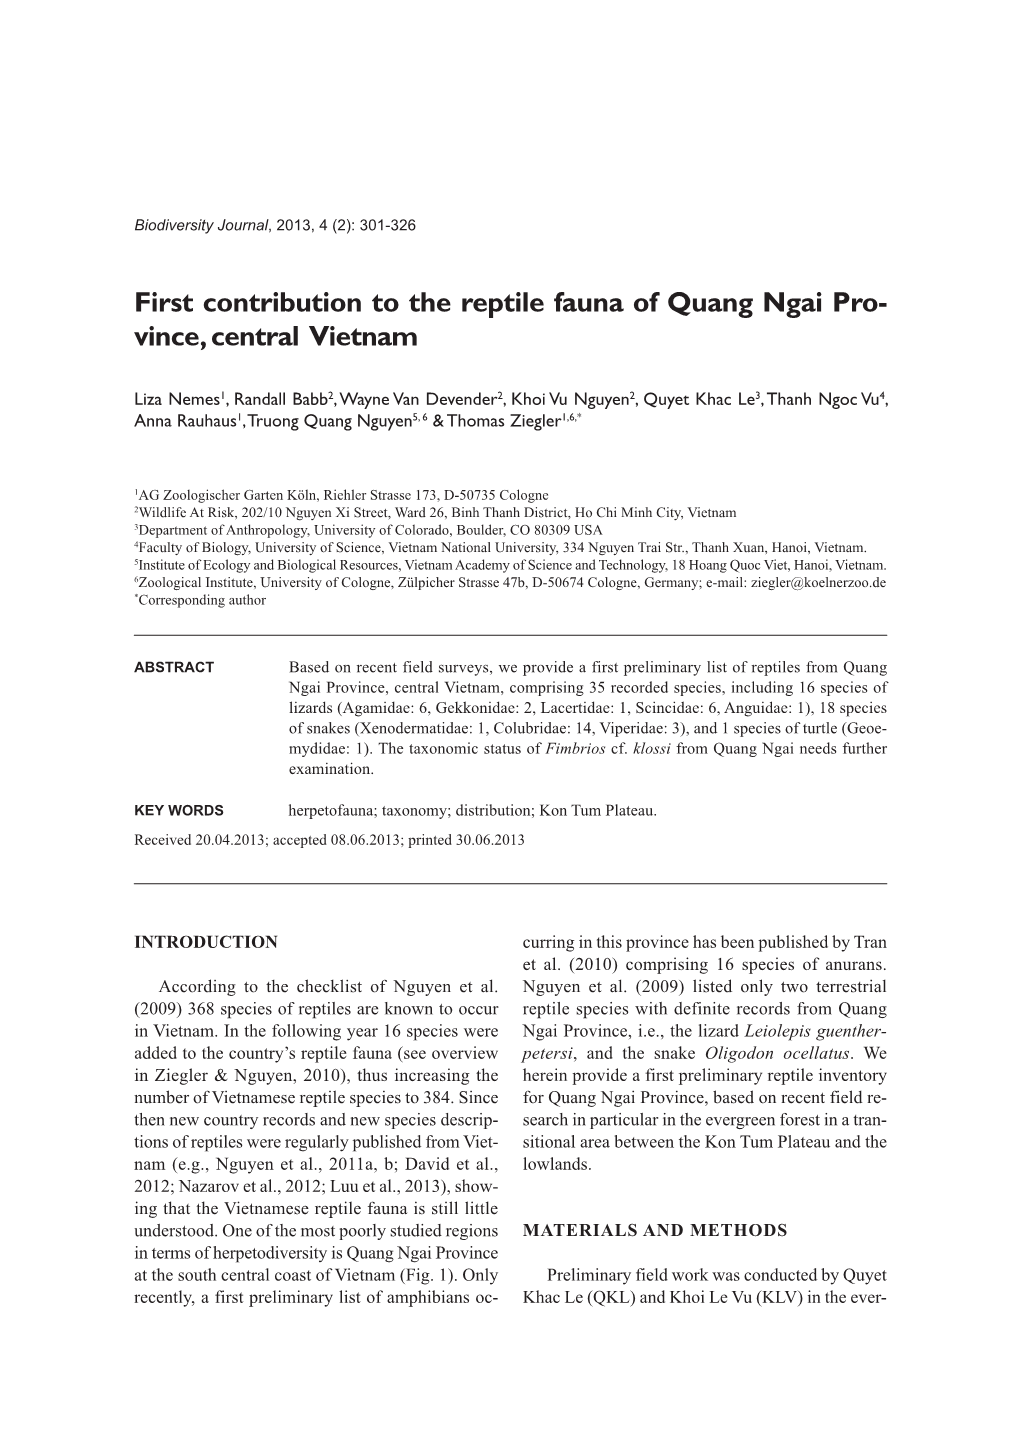 First Contribution to the Reptile Fauna of Quang Ngai Pro- Vince, Central Vietnam